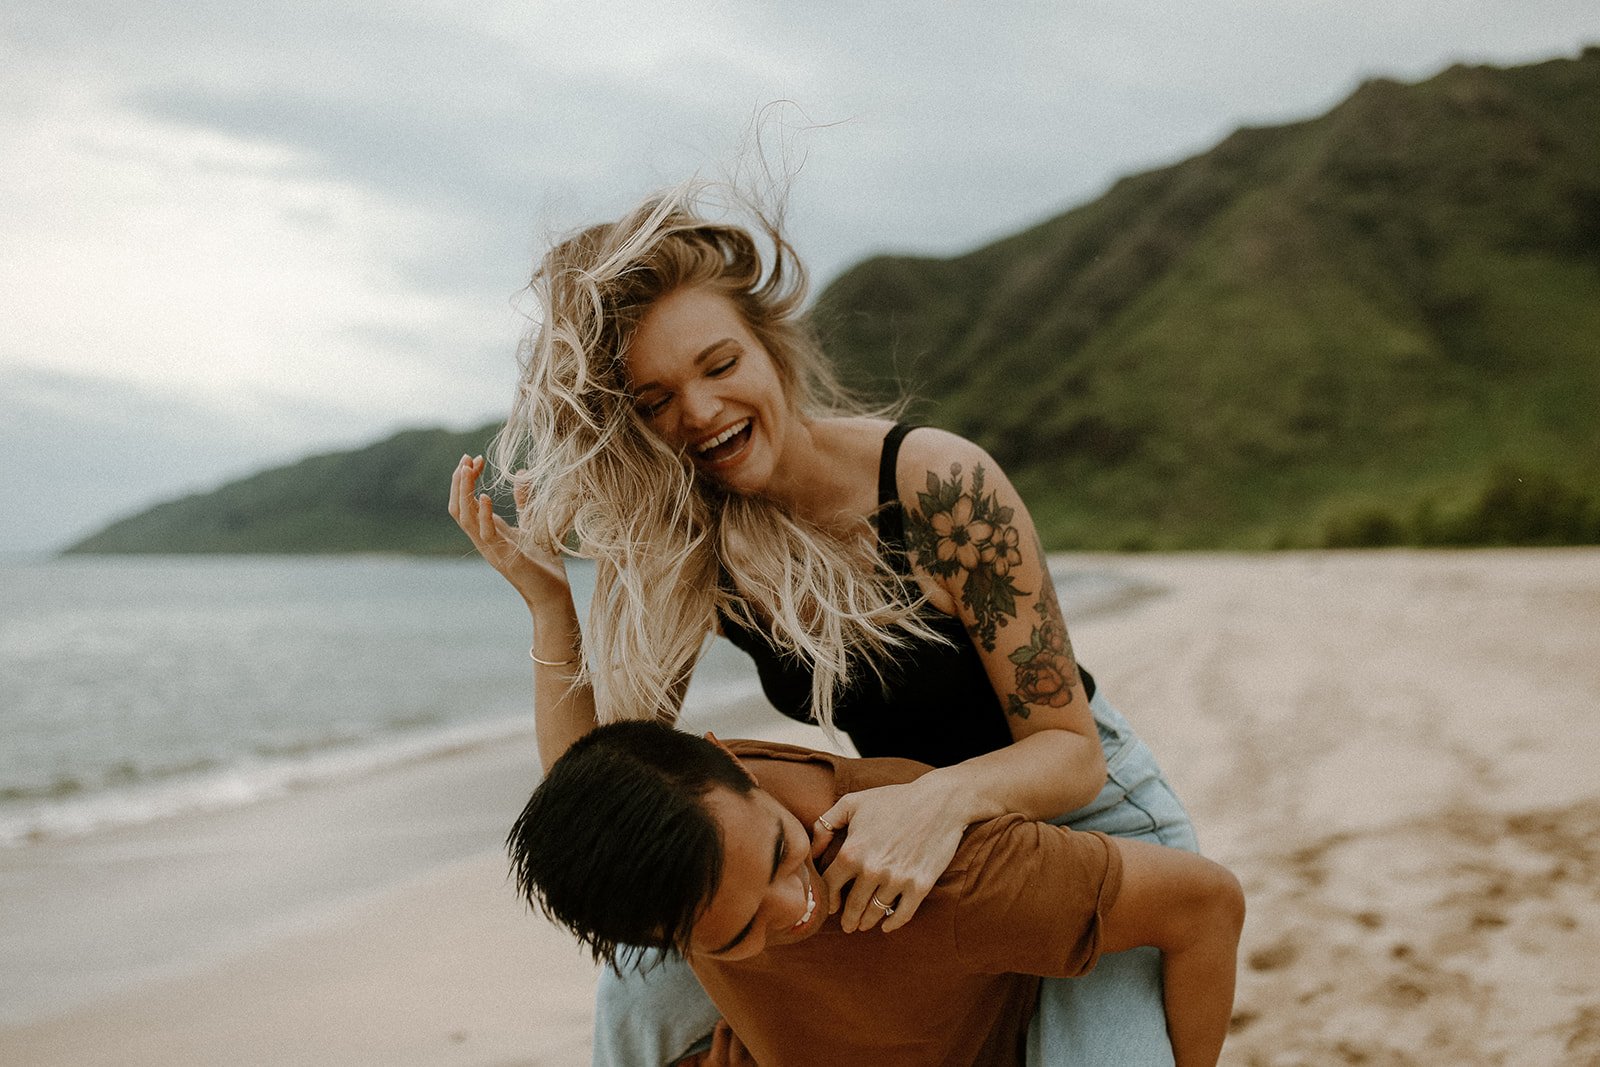 Hayley and Christian's adventurous couple session at Makua beach in oahu, hawaii